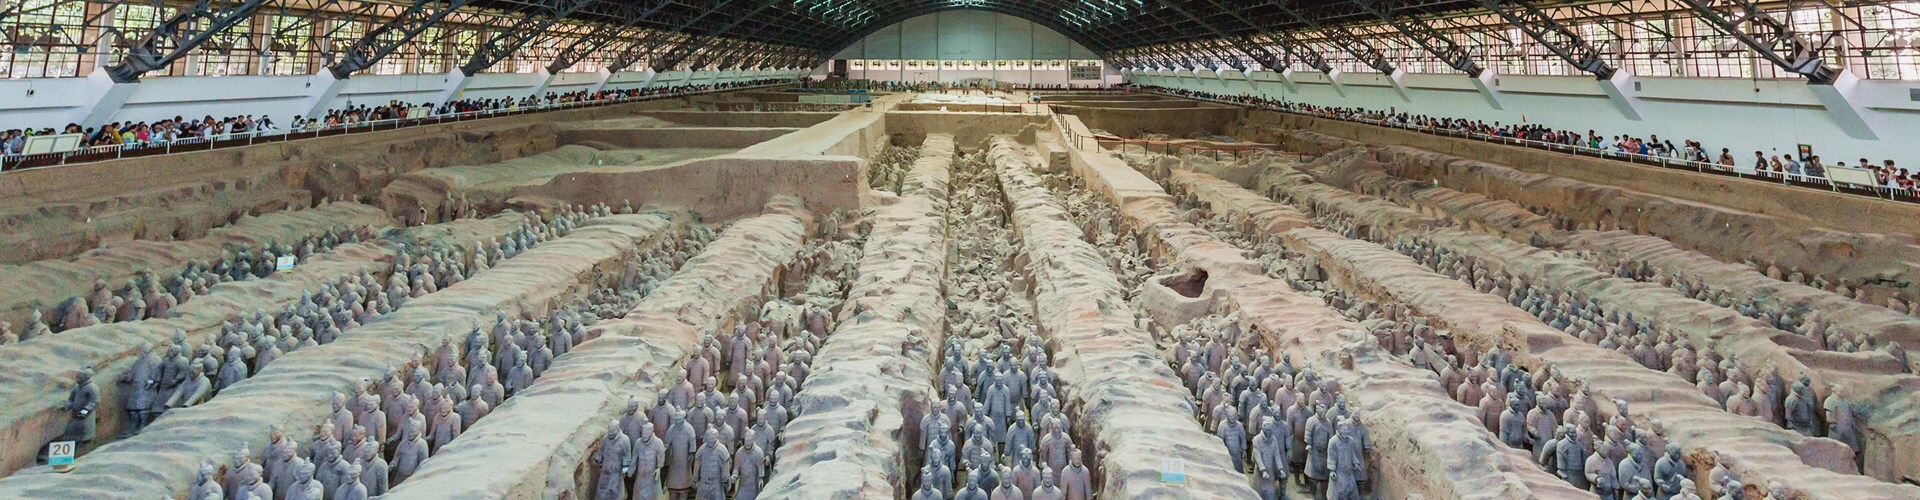 The Terracotta Army - Everything You Should Know